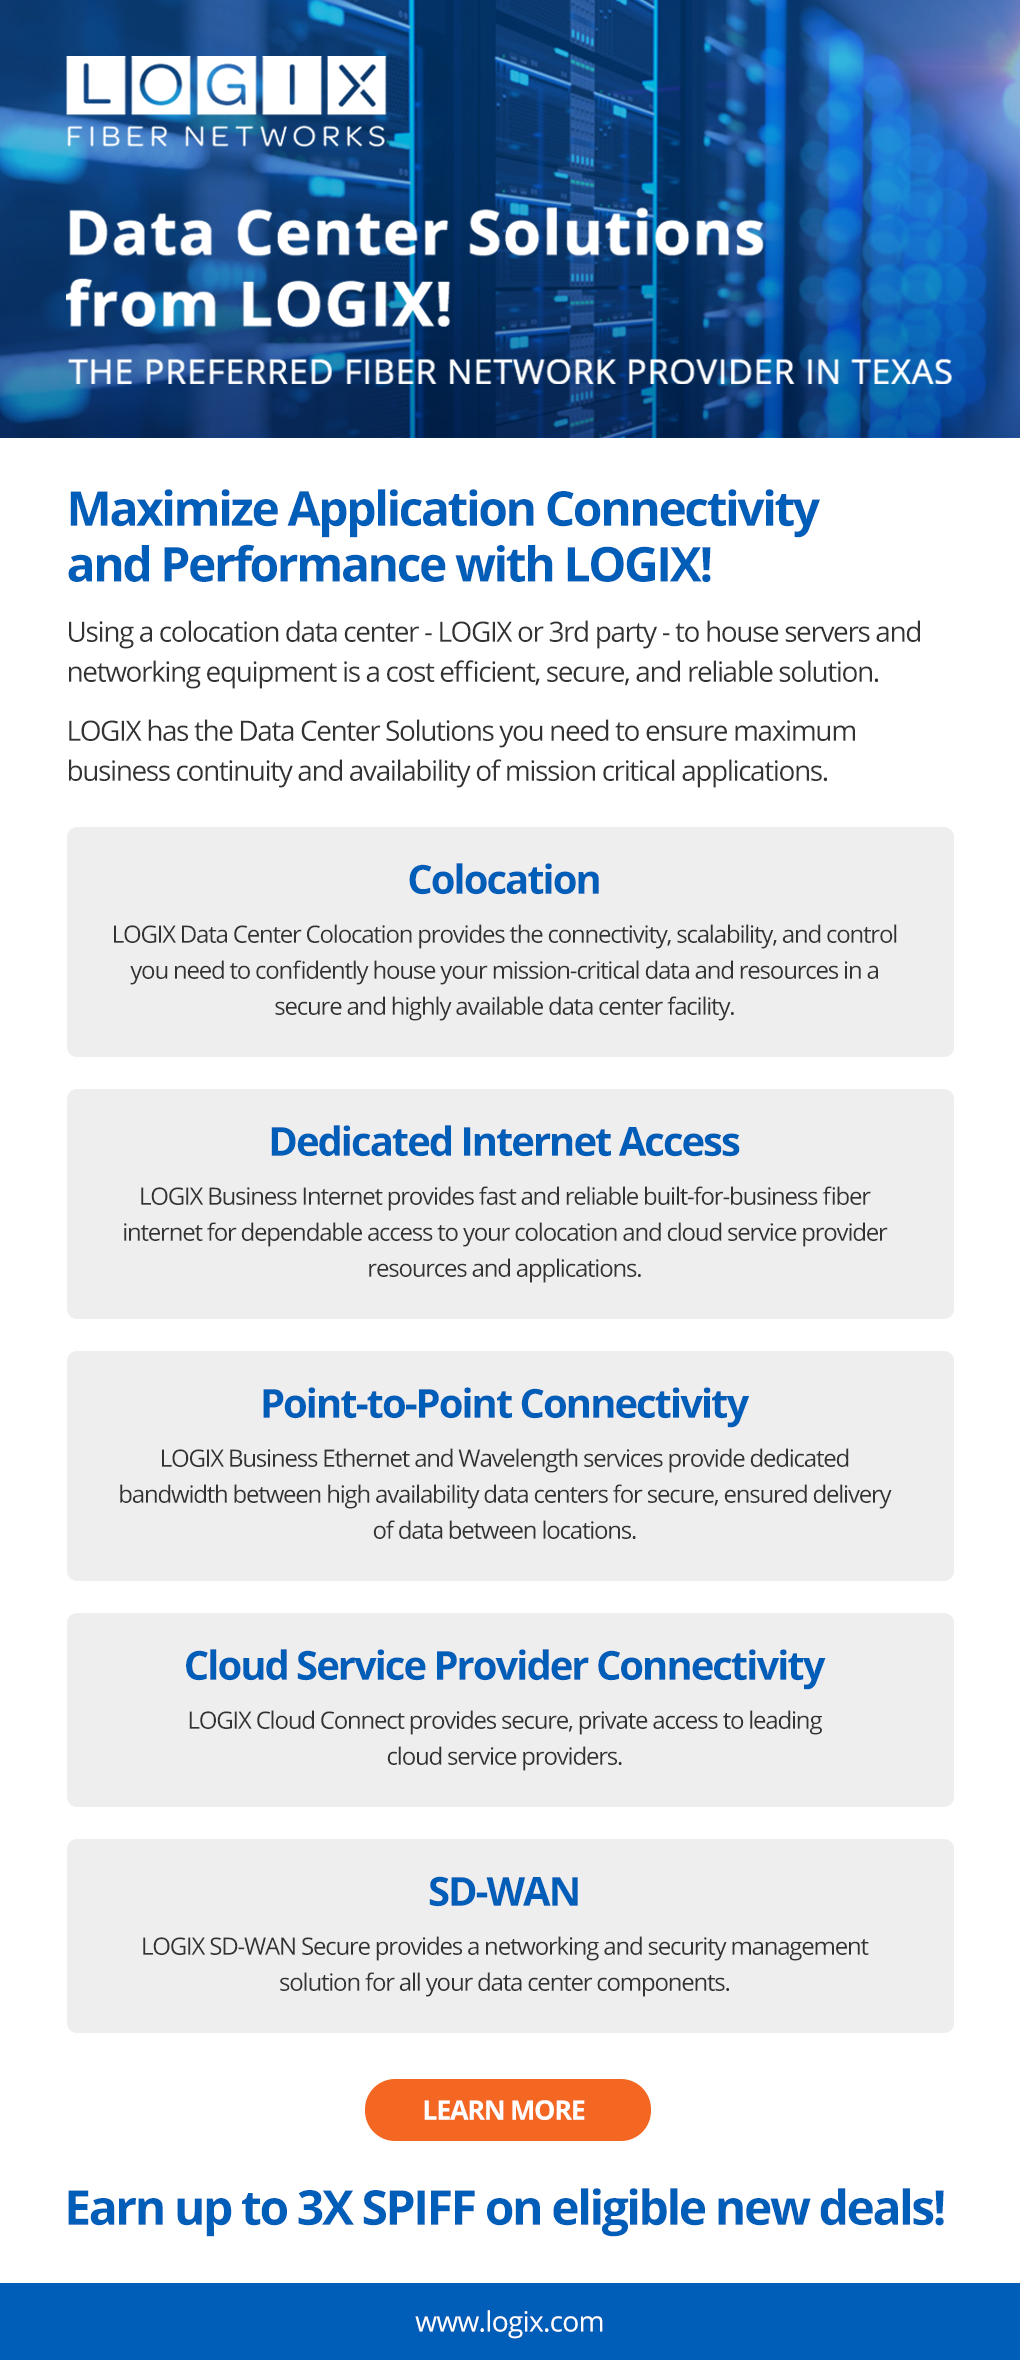 Data Center Solutions from LOGIX!